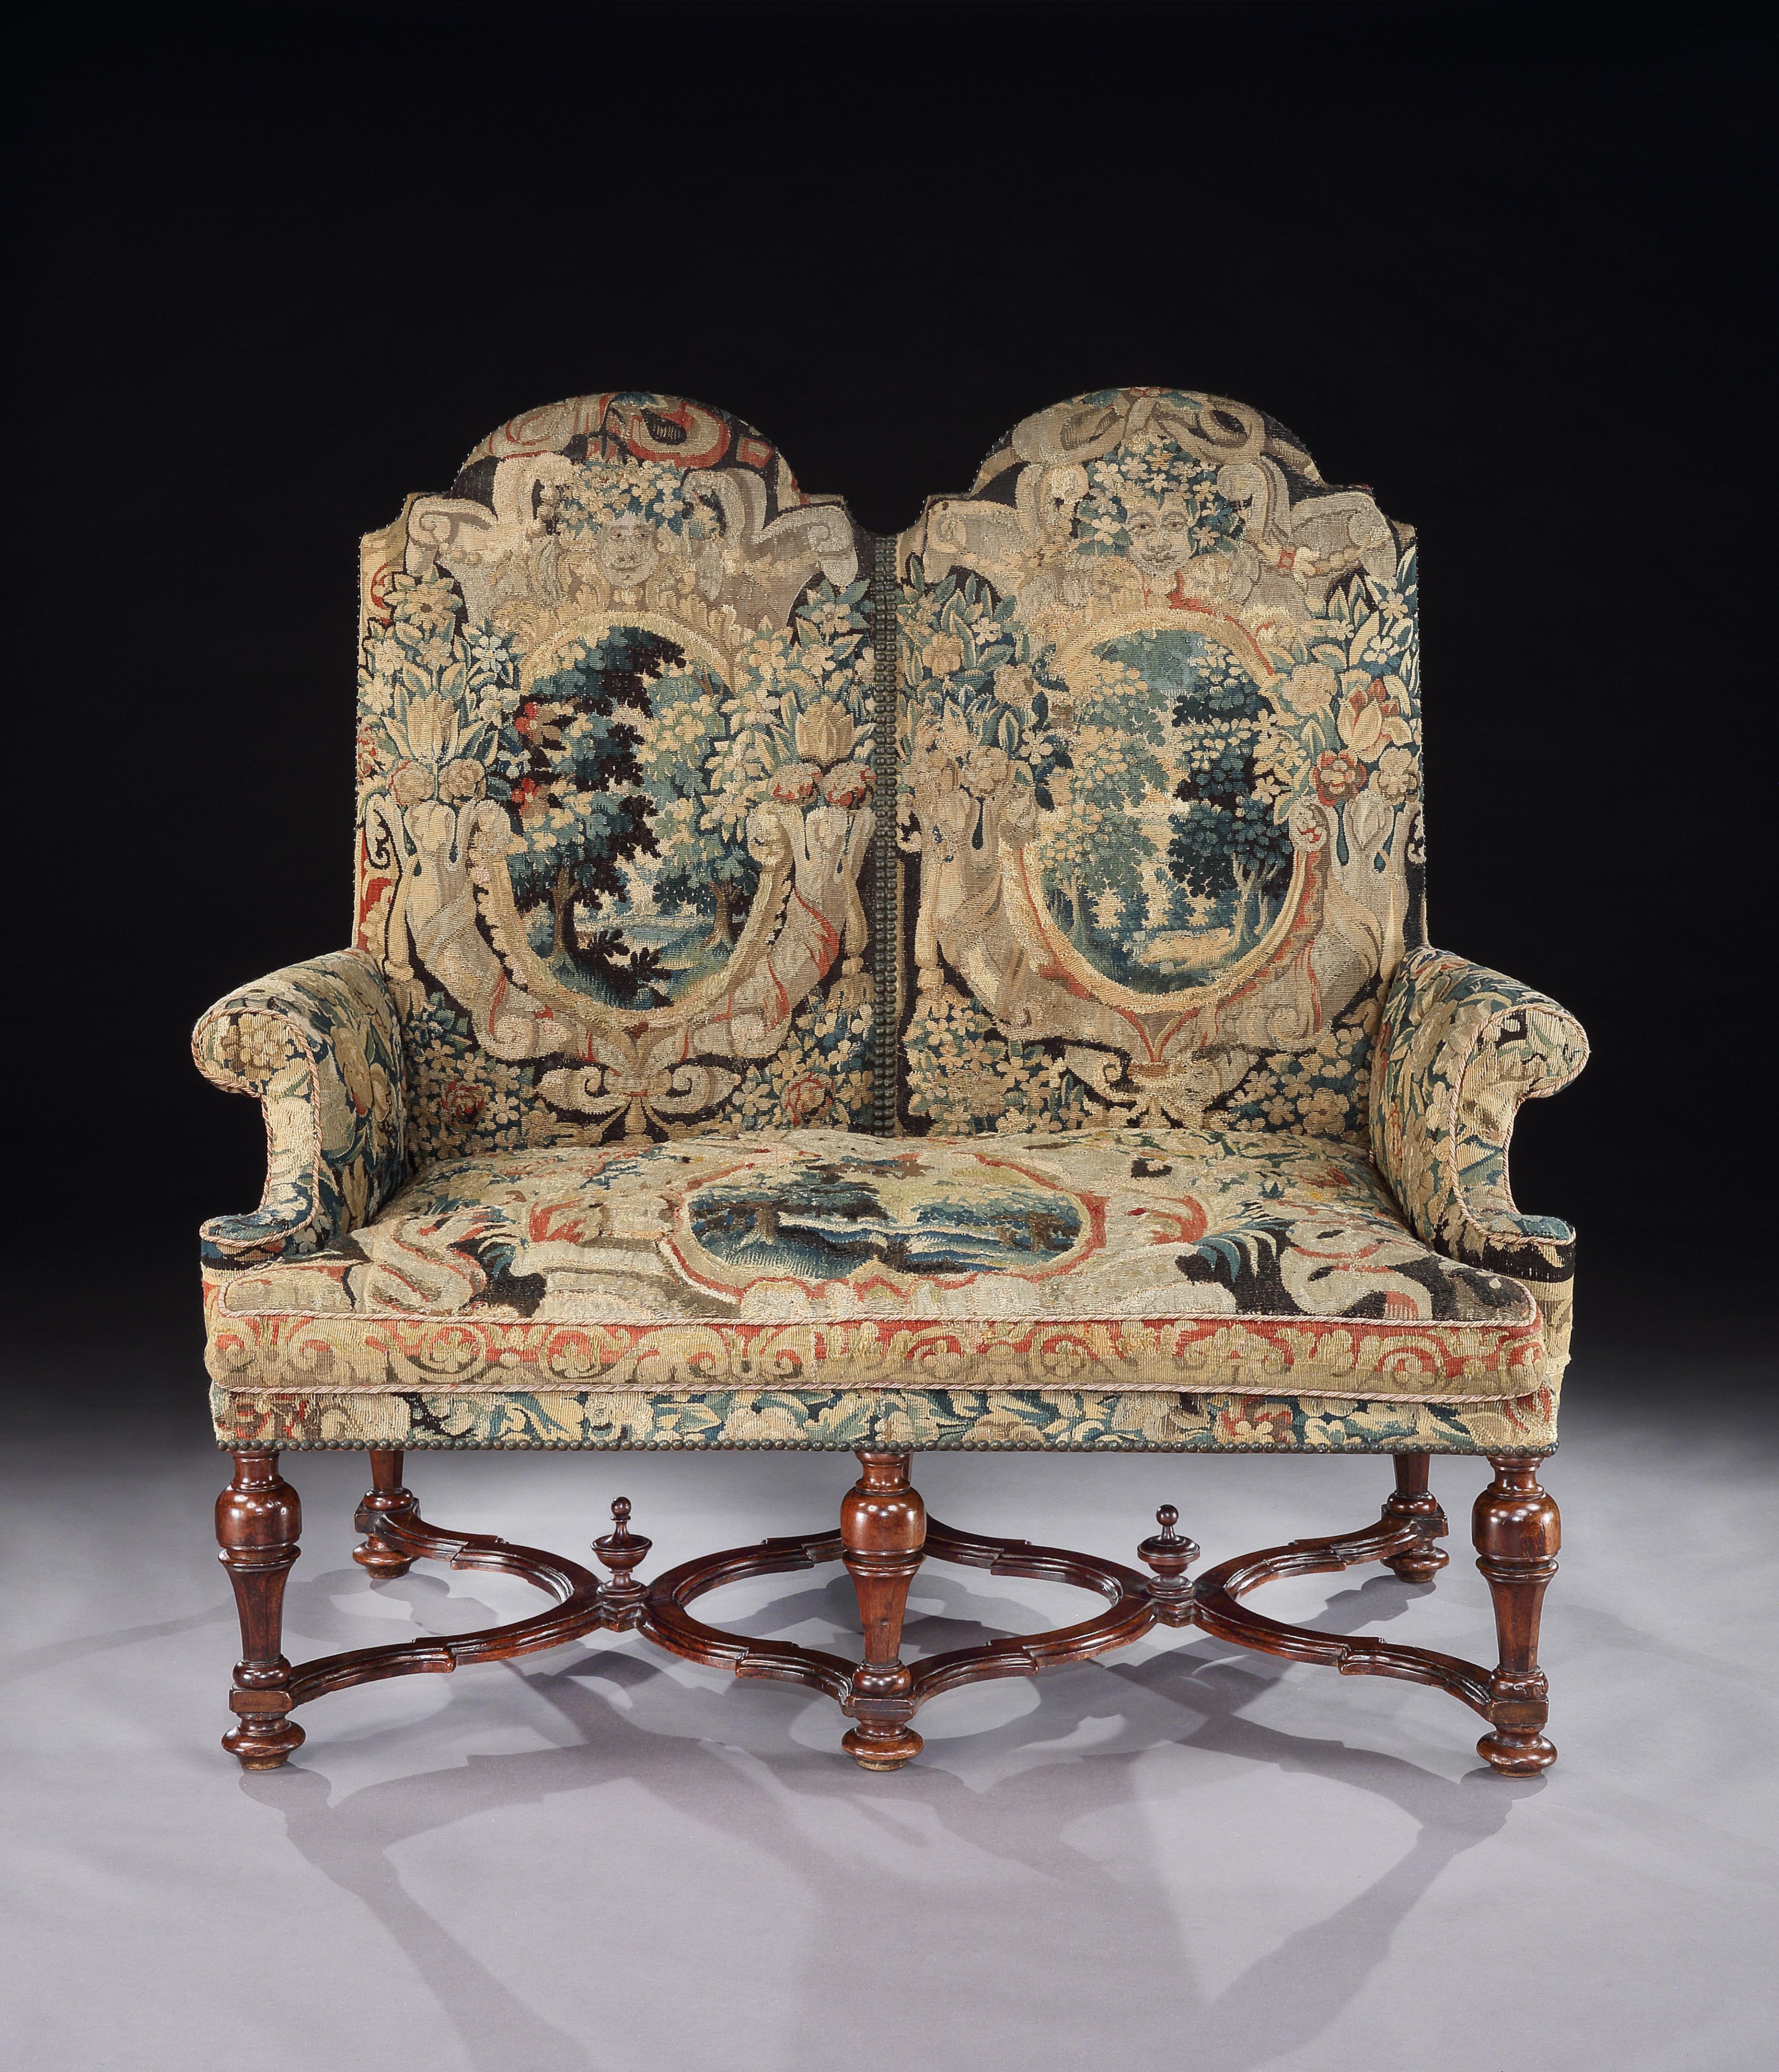 An exceptionally, rare, transitional, double-chair, settee, circa 1700, upholstered in fine, 17th century century Brussels tapestry

Just purchased, more information and images available soon.

- From the 1690s upholstered settees formed part of the